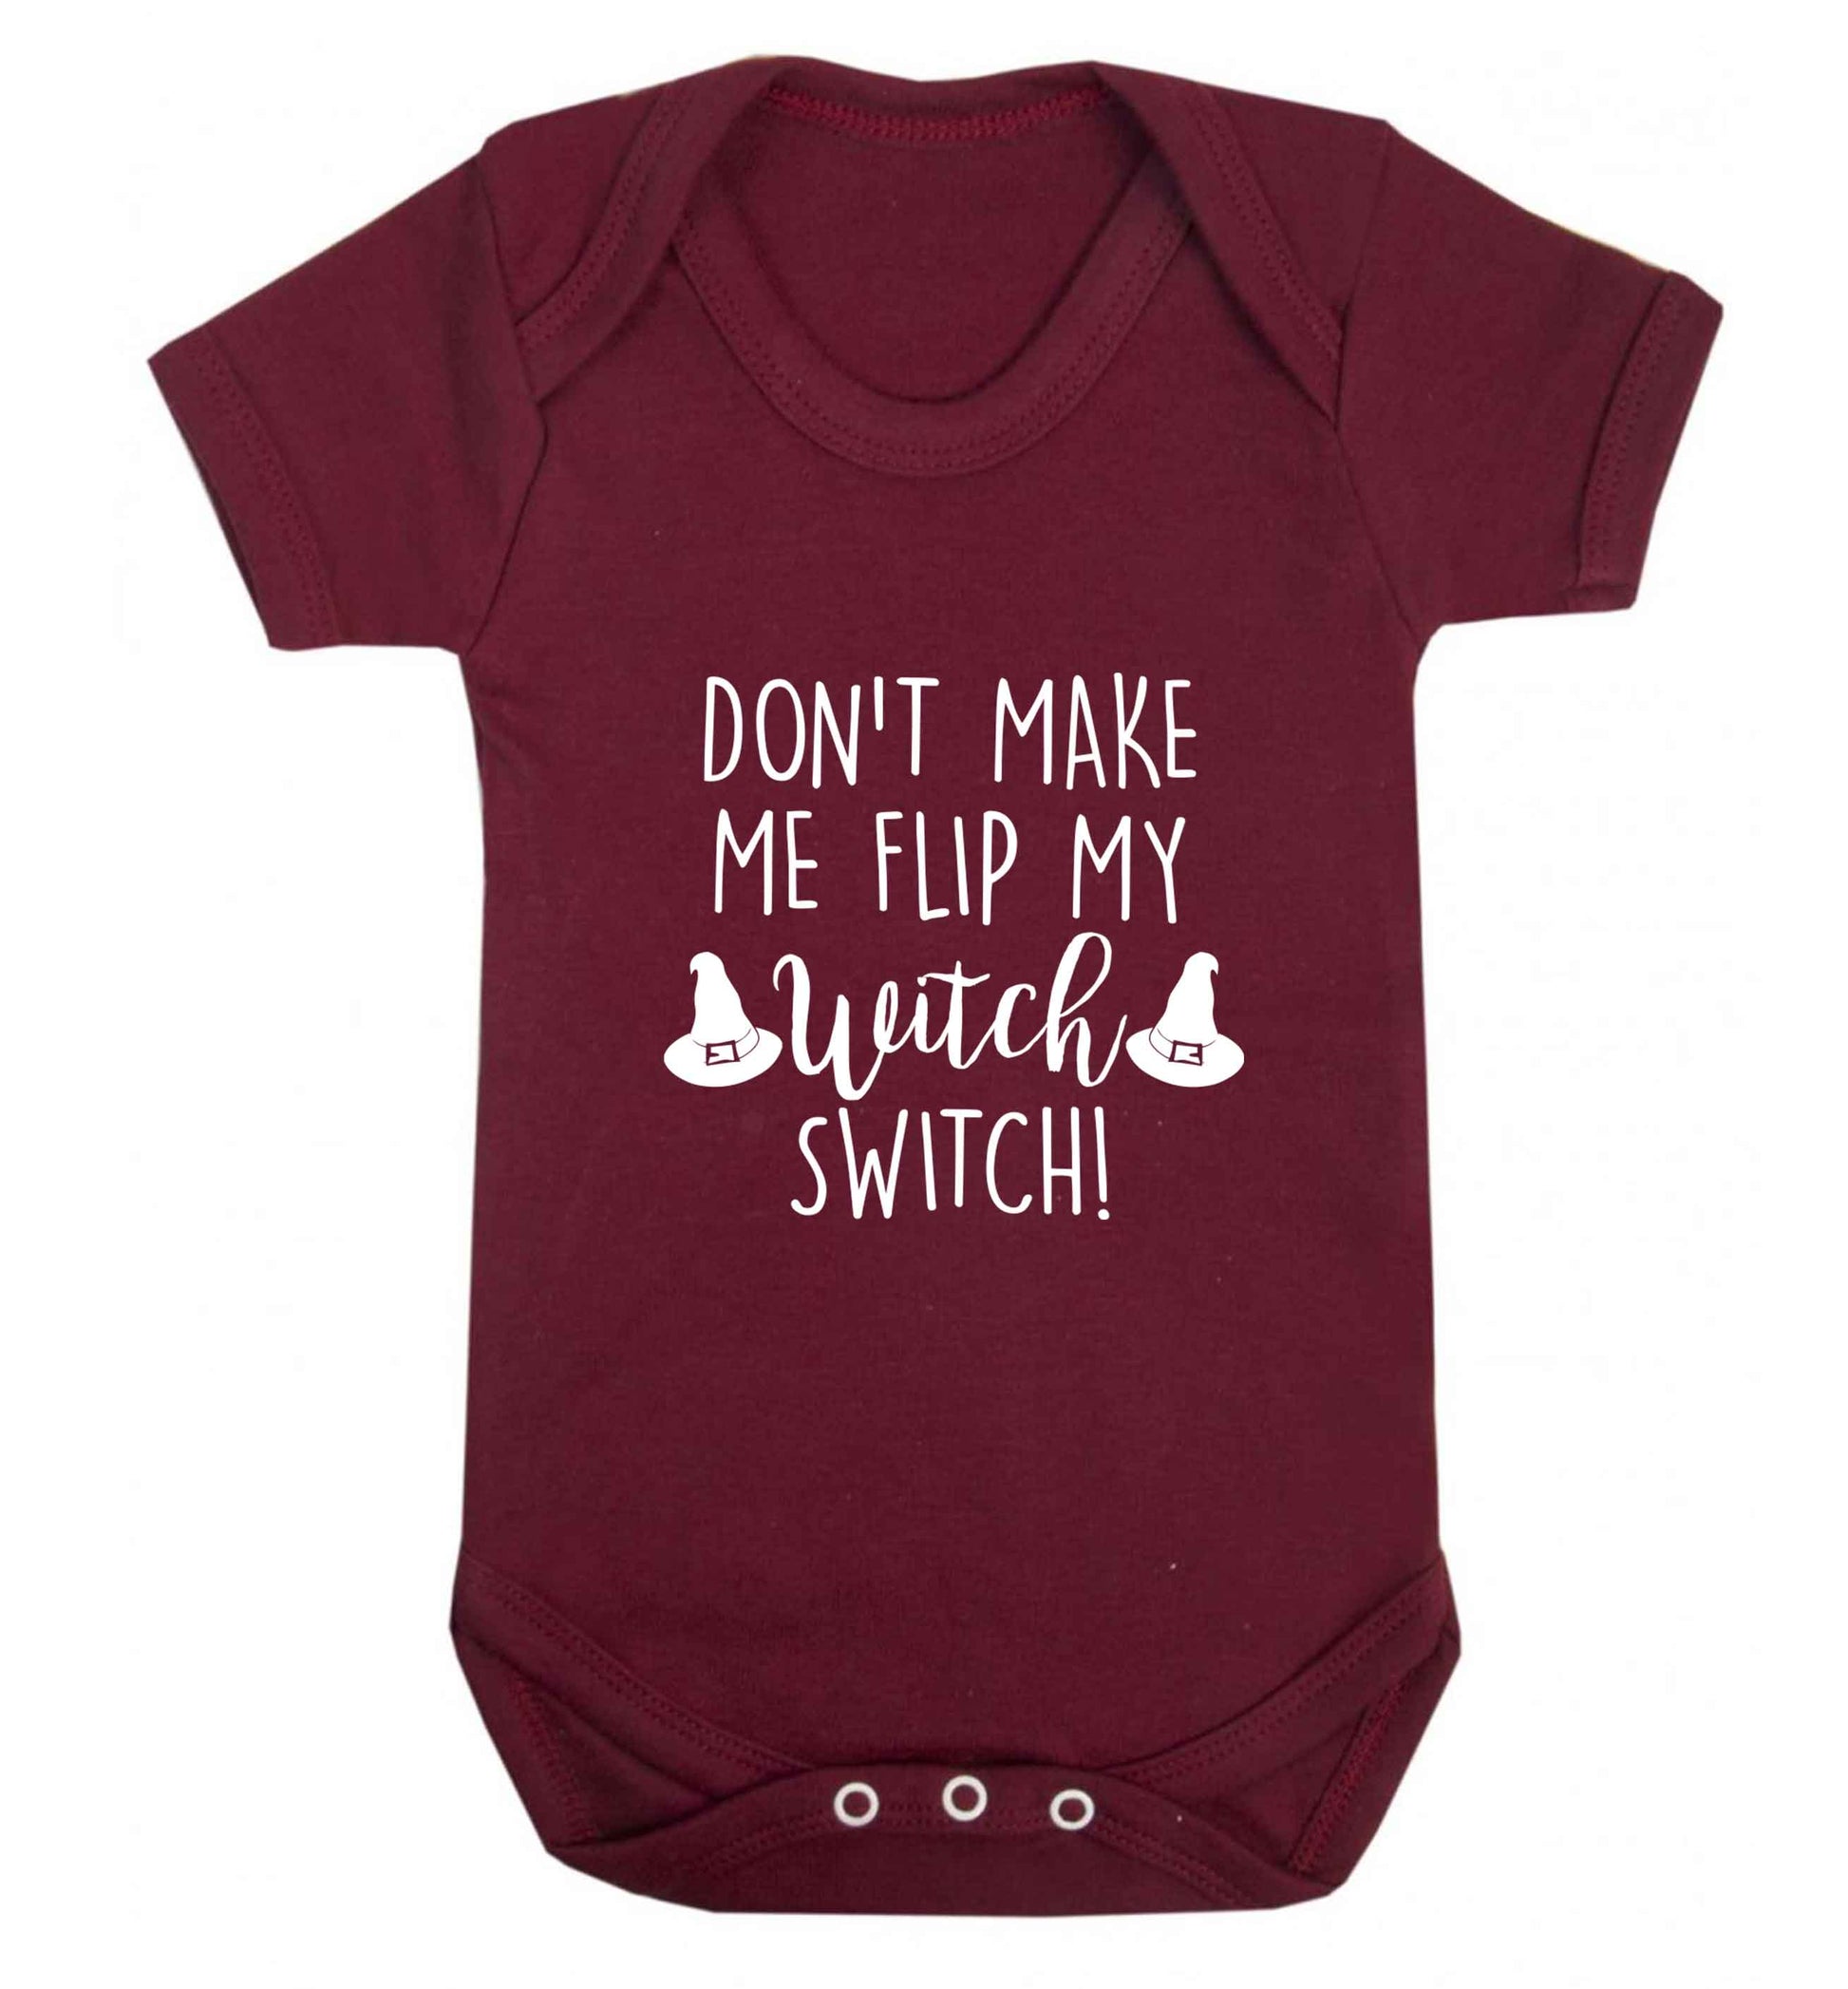 Don't make me flip my witch switch baby vest maroon 18-24 months